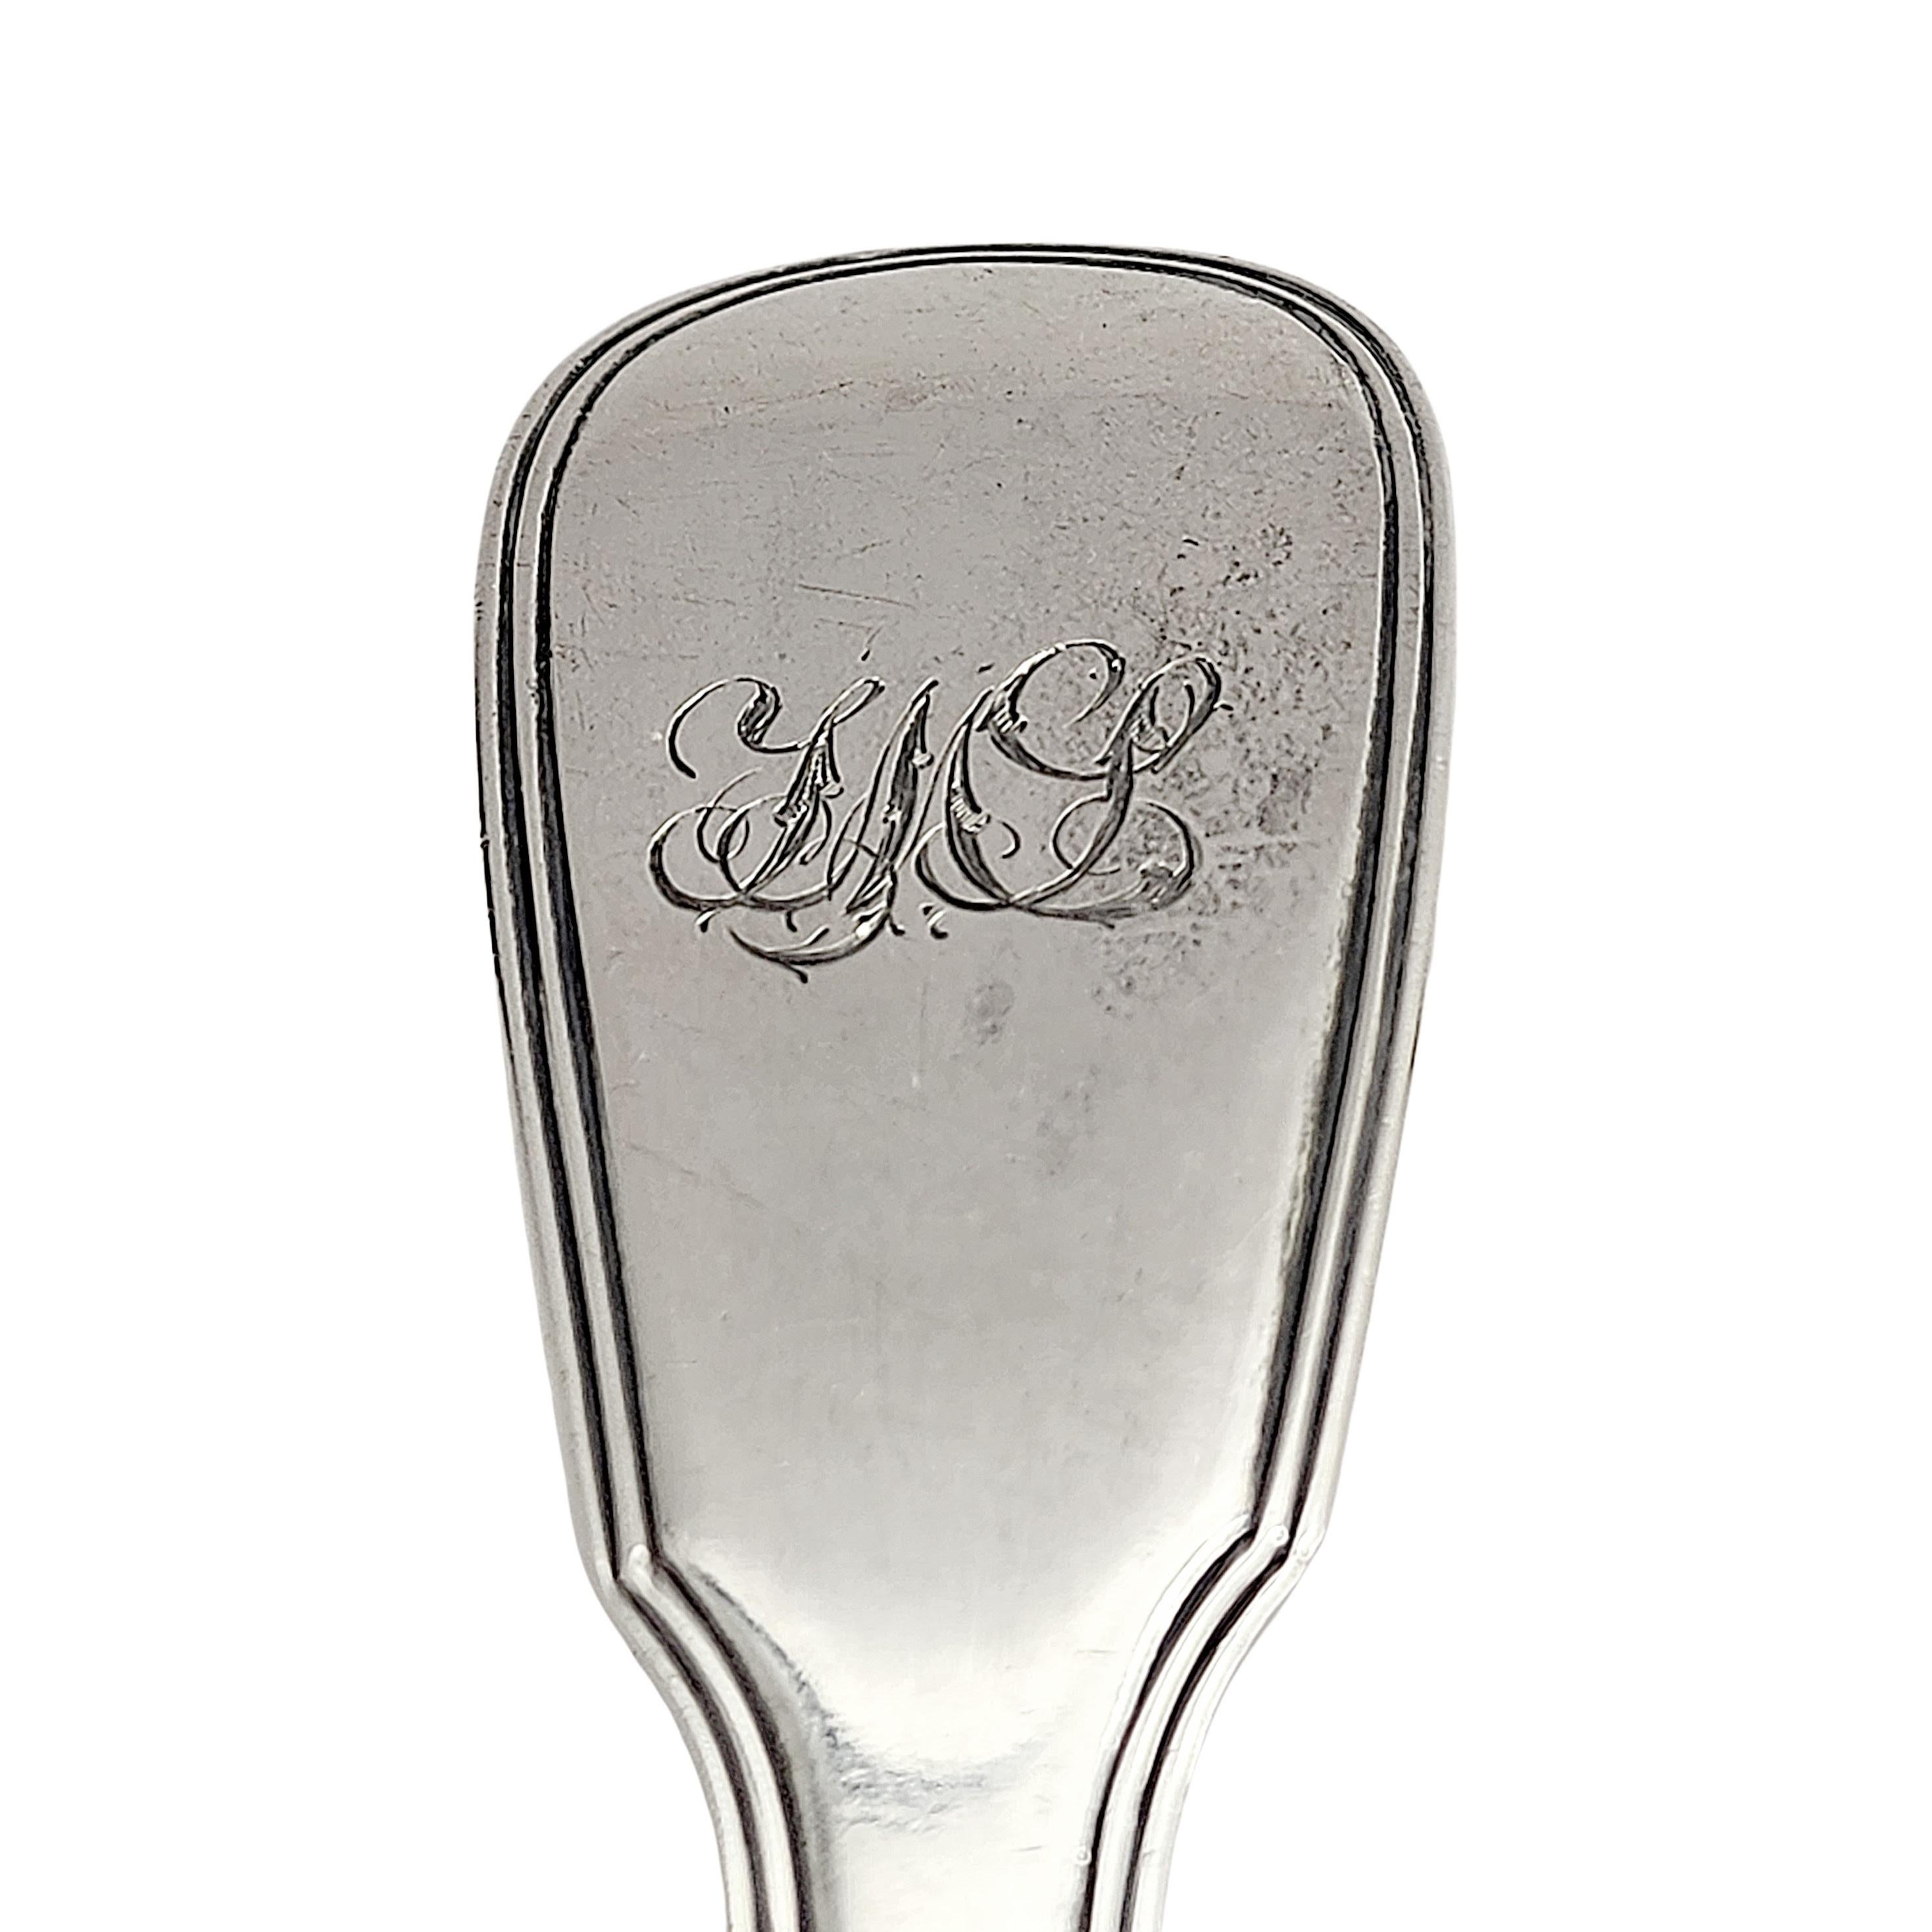 Antique Georgian Era English Sterling Silver Fish Server with Monogram #14159 For Sale 4